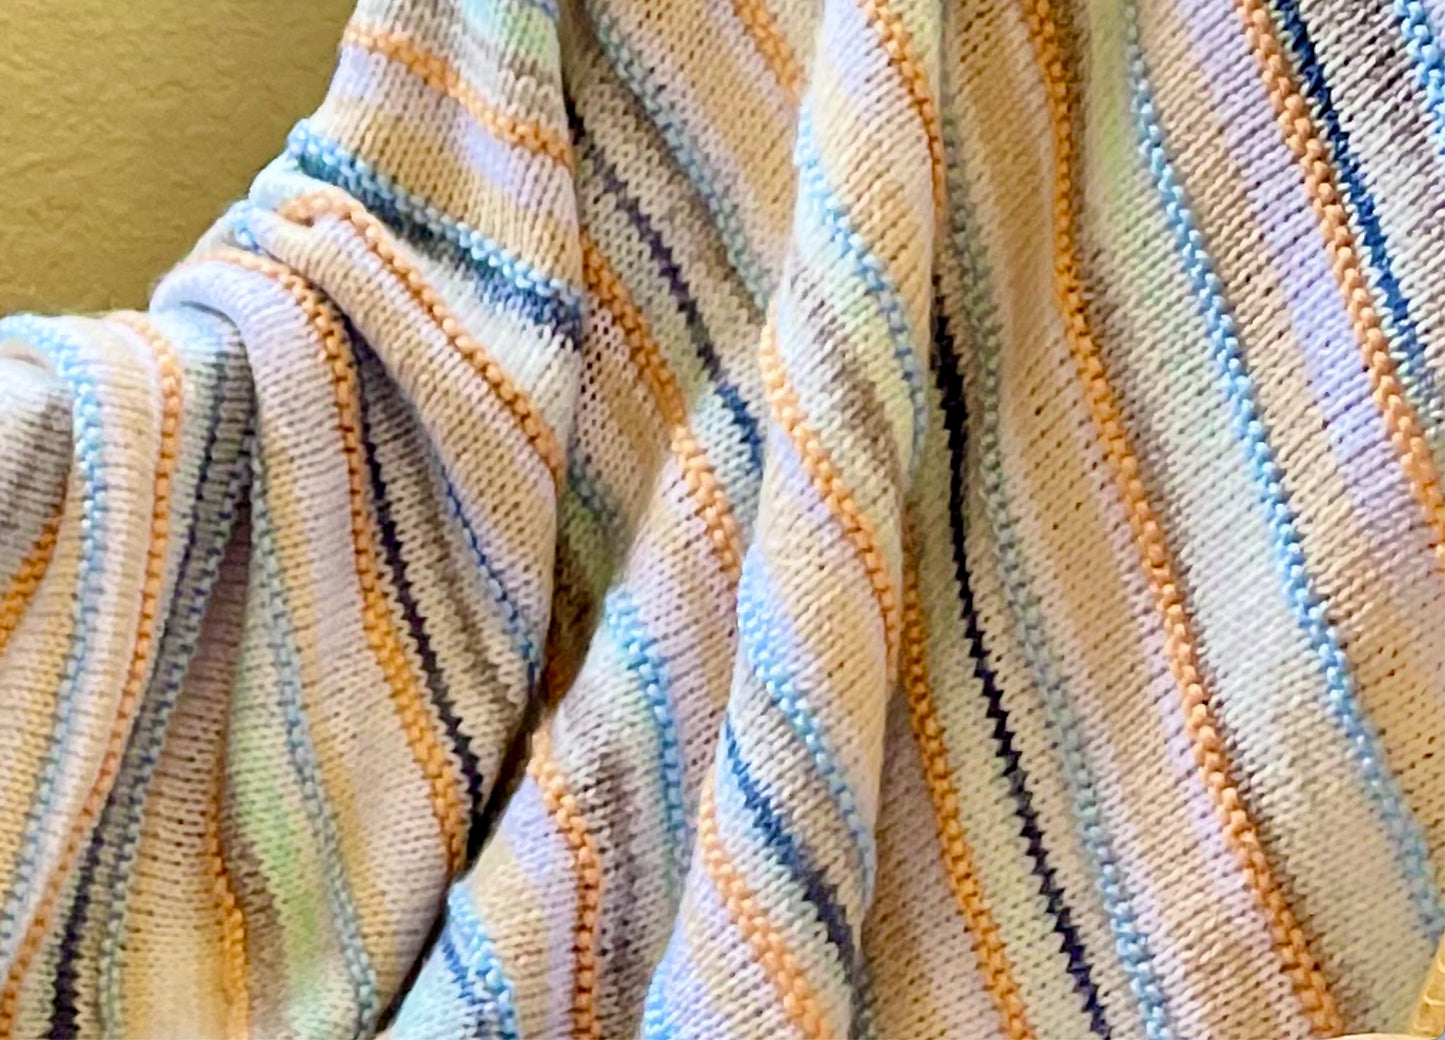 Malibu beach colors of pastel blues, greens, and earth tones are blended together in this soft, hand knit baby blanket.  A perfect one-of-a-kind gift for baby. 